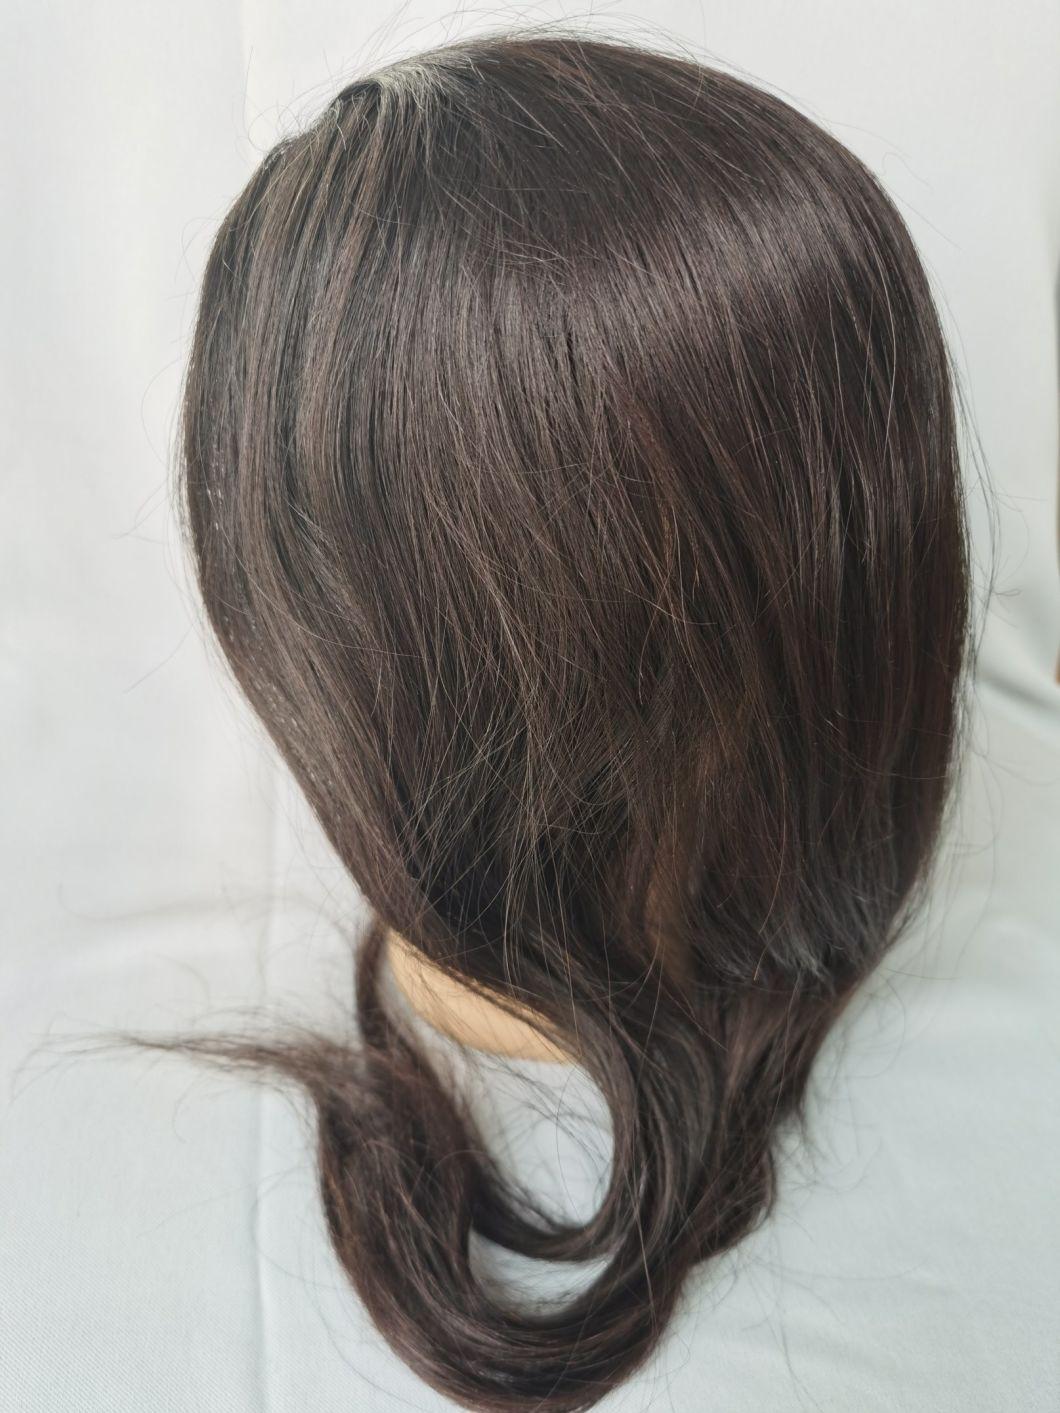 2022 Most Natural Growing Looking Silk Top Injected Lace Human Hairpieces Made of Remy Human Hair